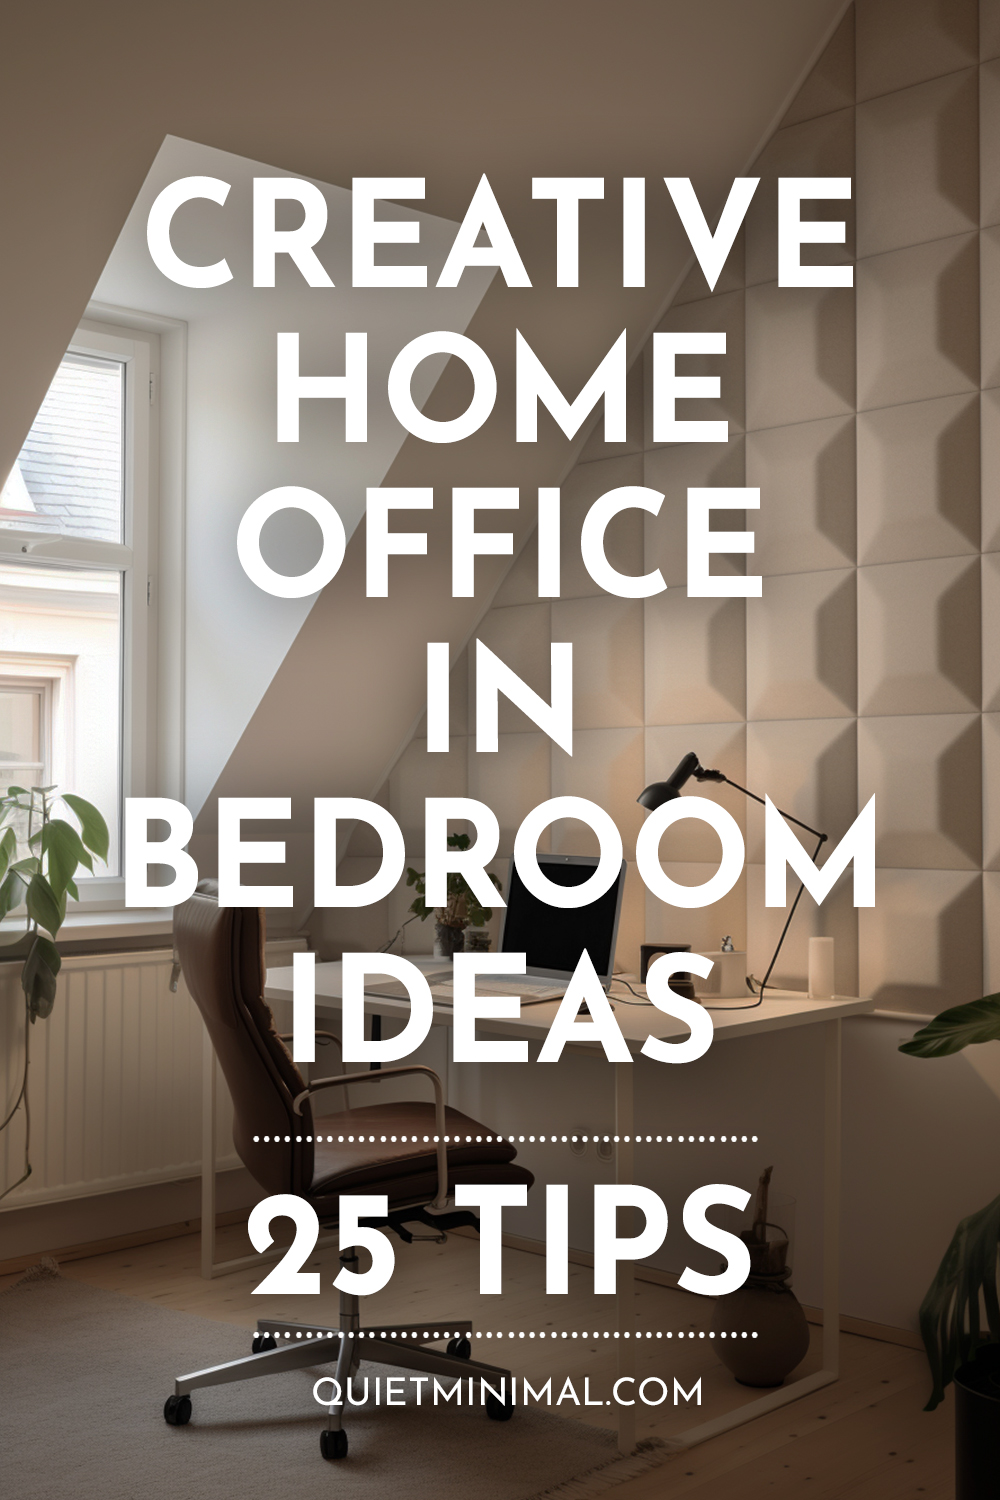 Creative Home Office Ideas in Bedroom: Get inspired with these 25 tips for transforming your bedroom into a stylish and functional office space.